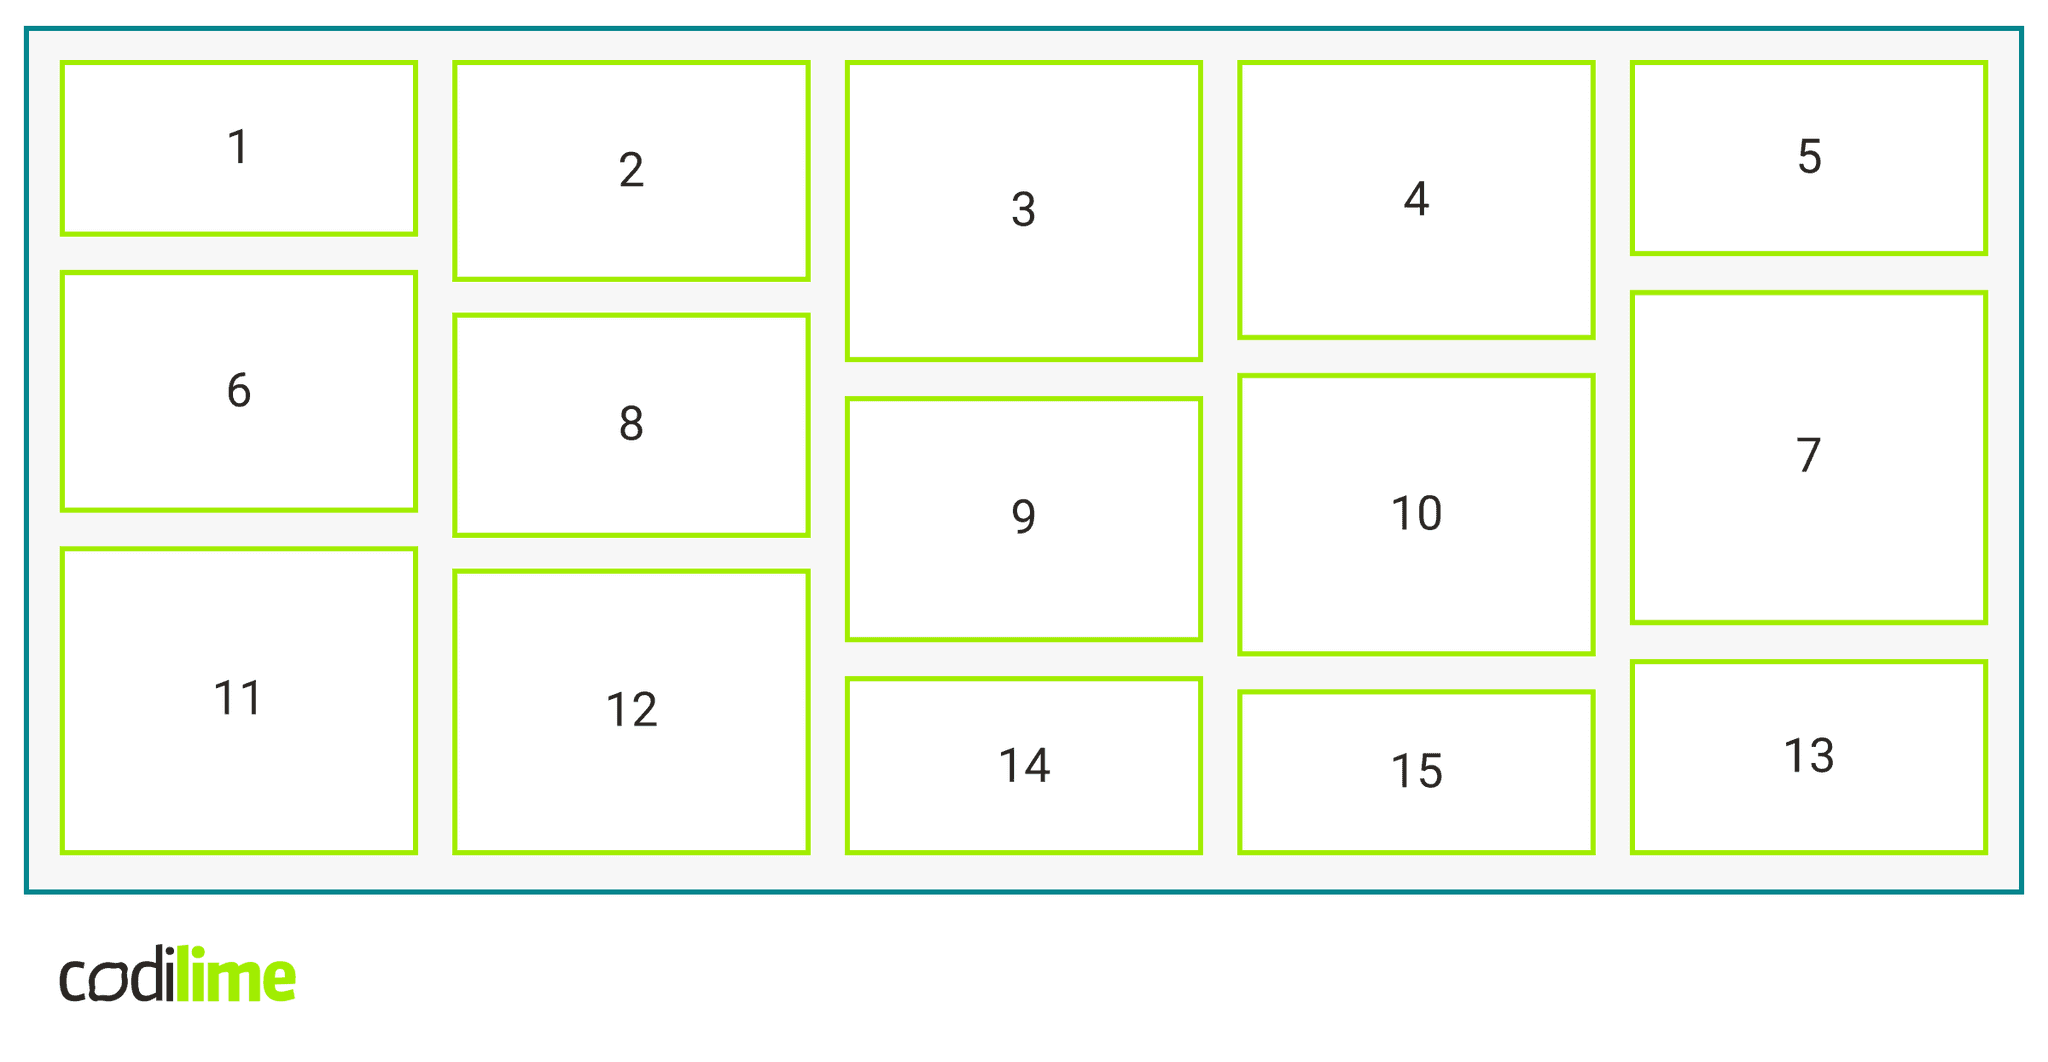 masonry layout with fixed empty spaces